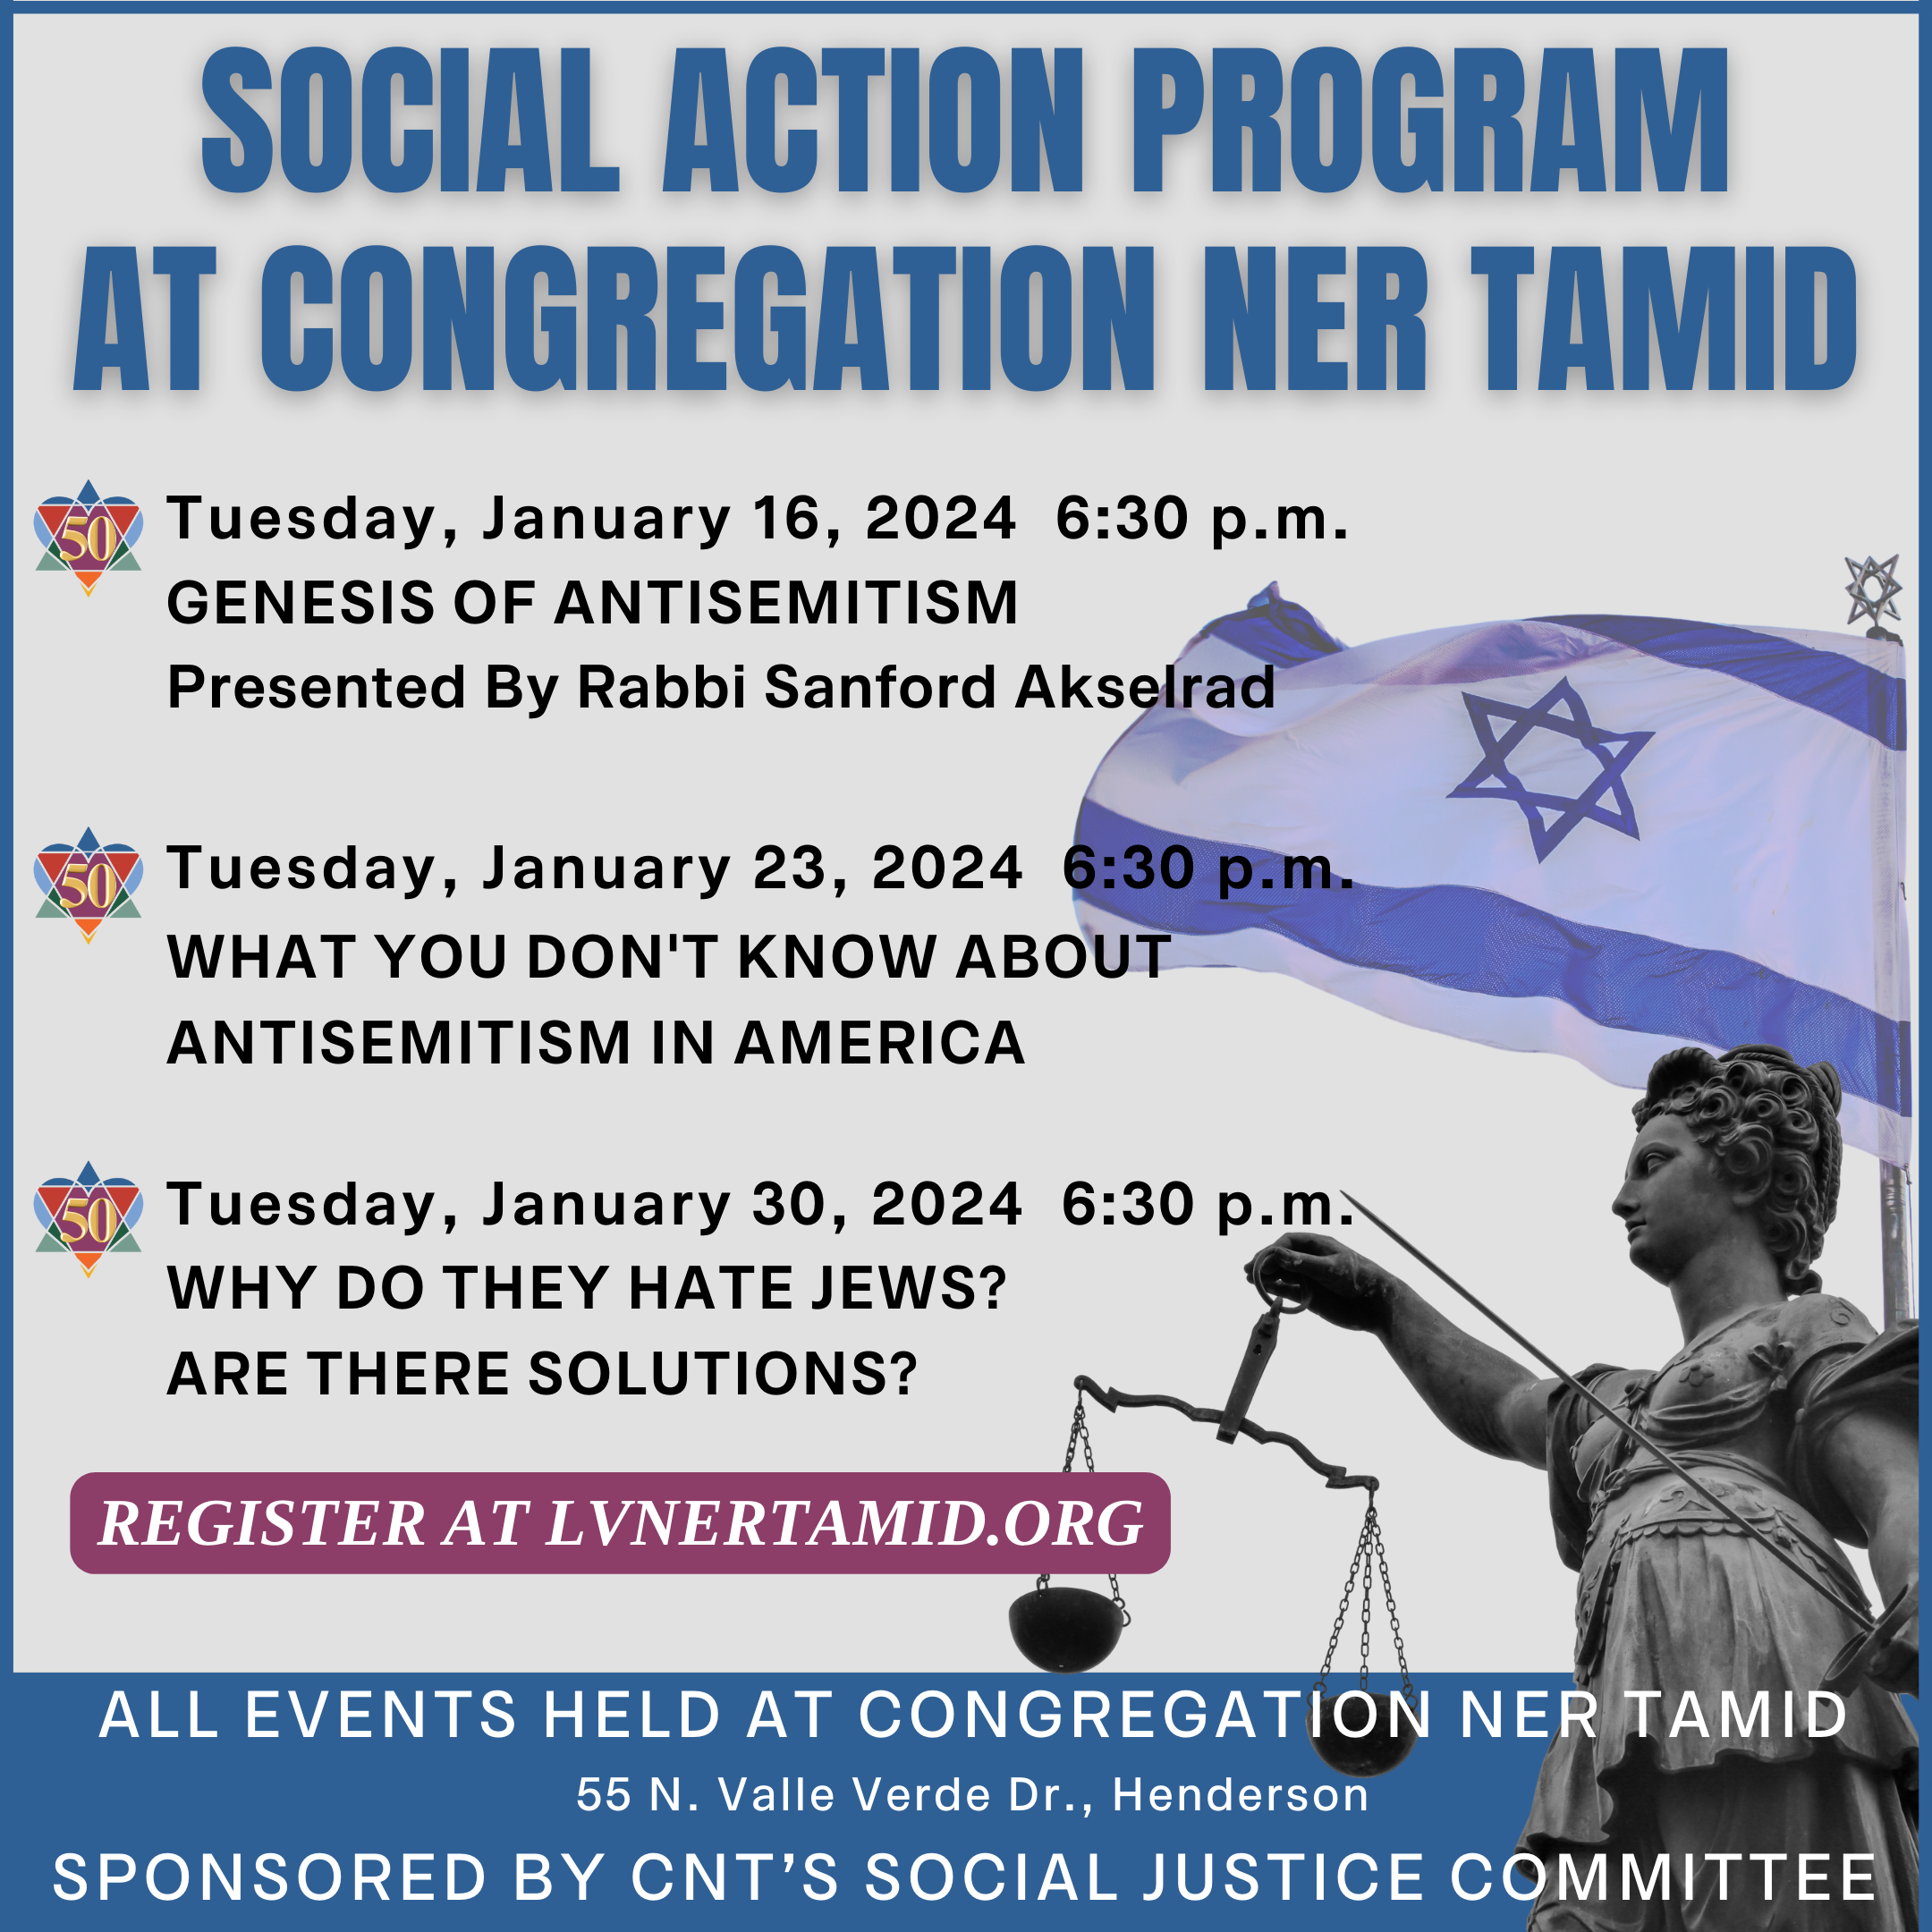 CNT'S SOCIAL ACTION COMMITTEE PRESENTS 'WHAT YOU DON'T KNOW ABOUT ANTISEMITISM IN AMERICA'